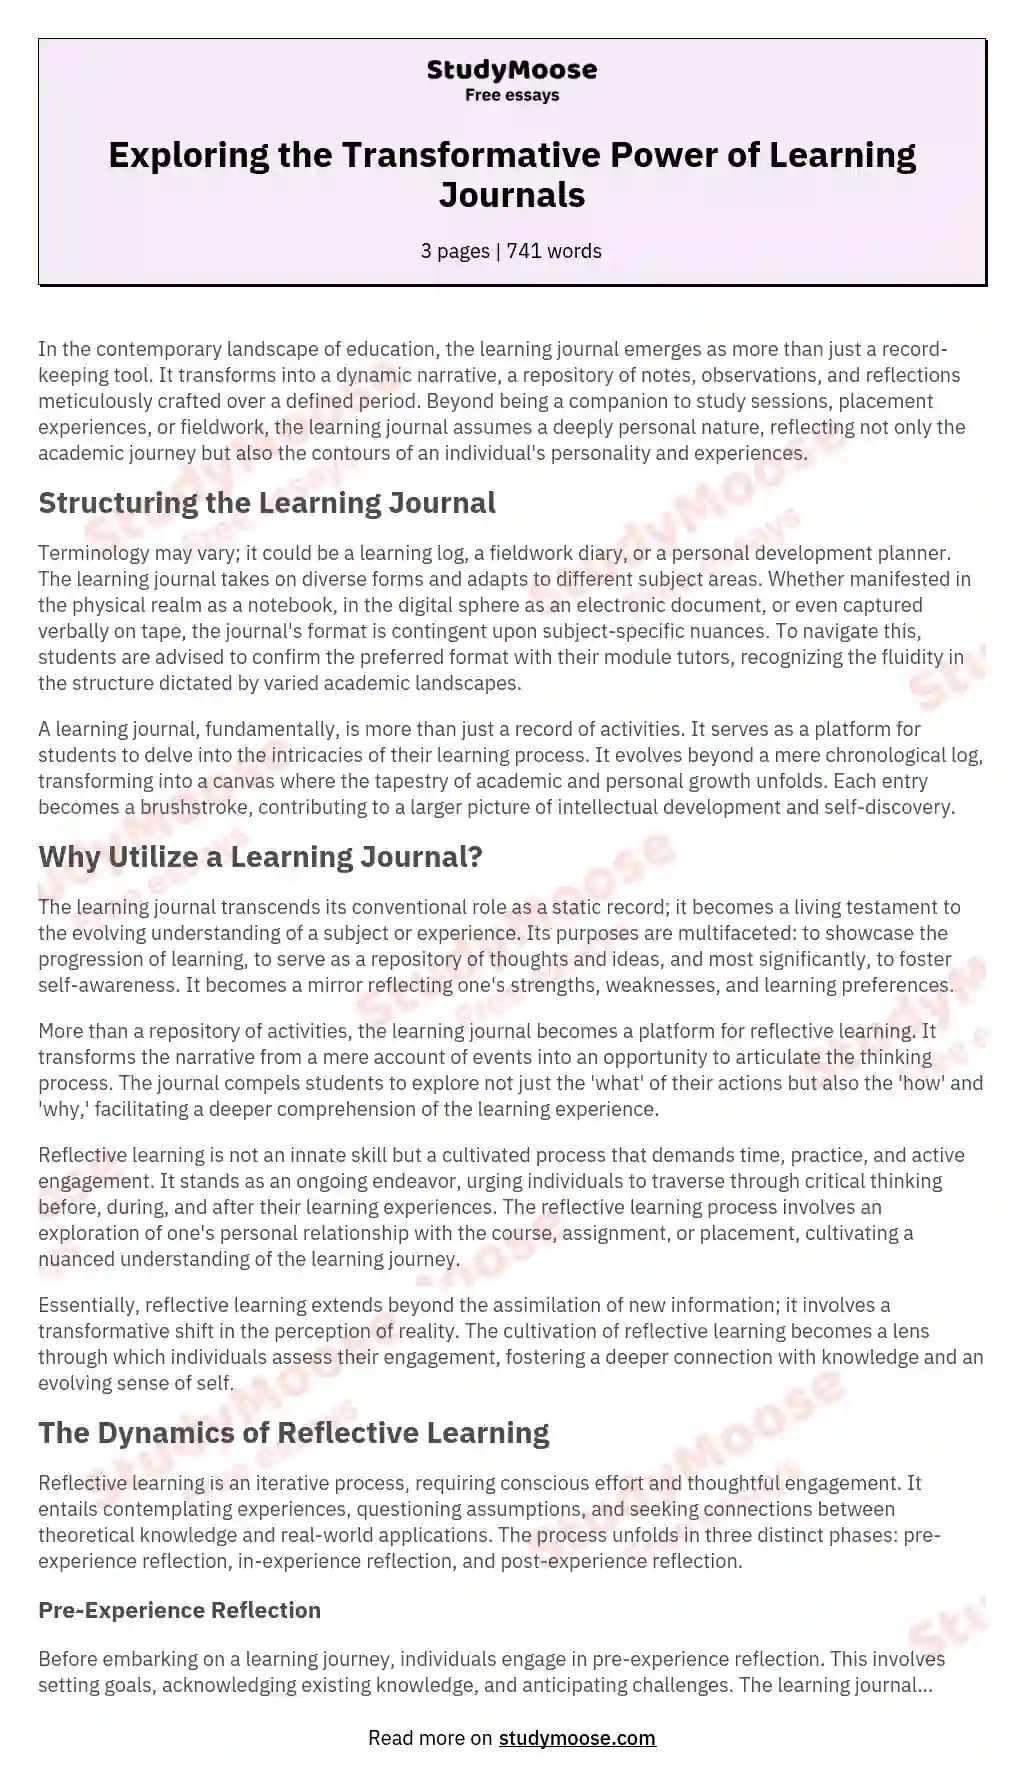 Exploring the Transformative Power of Learning Journals essay